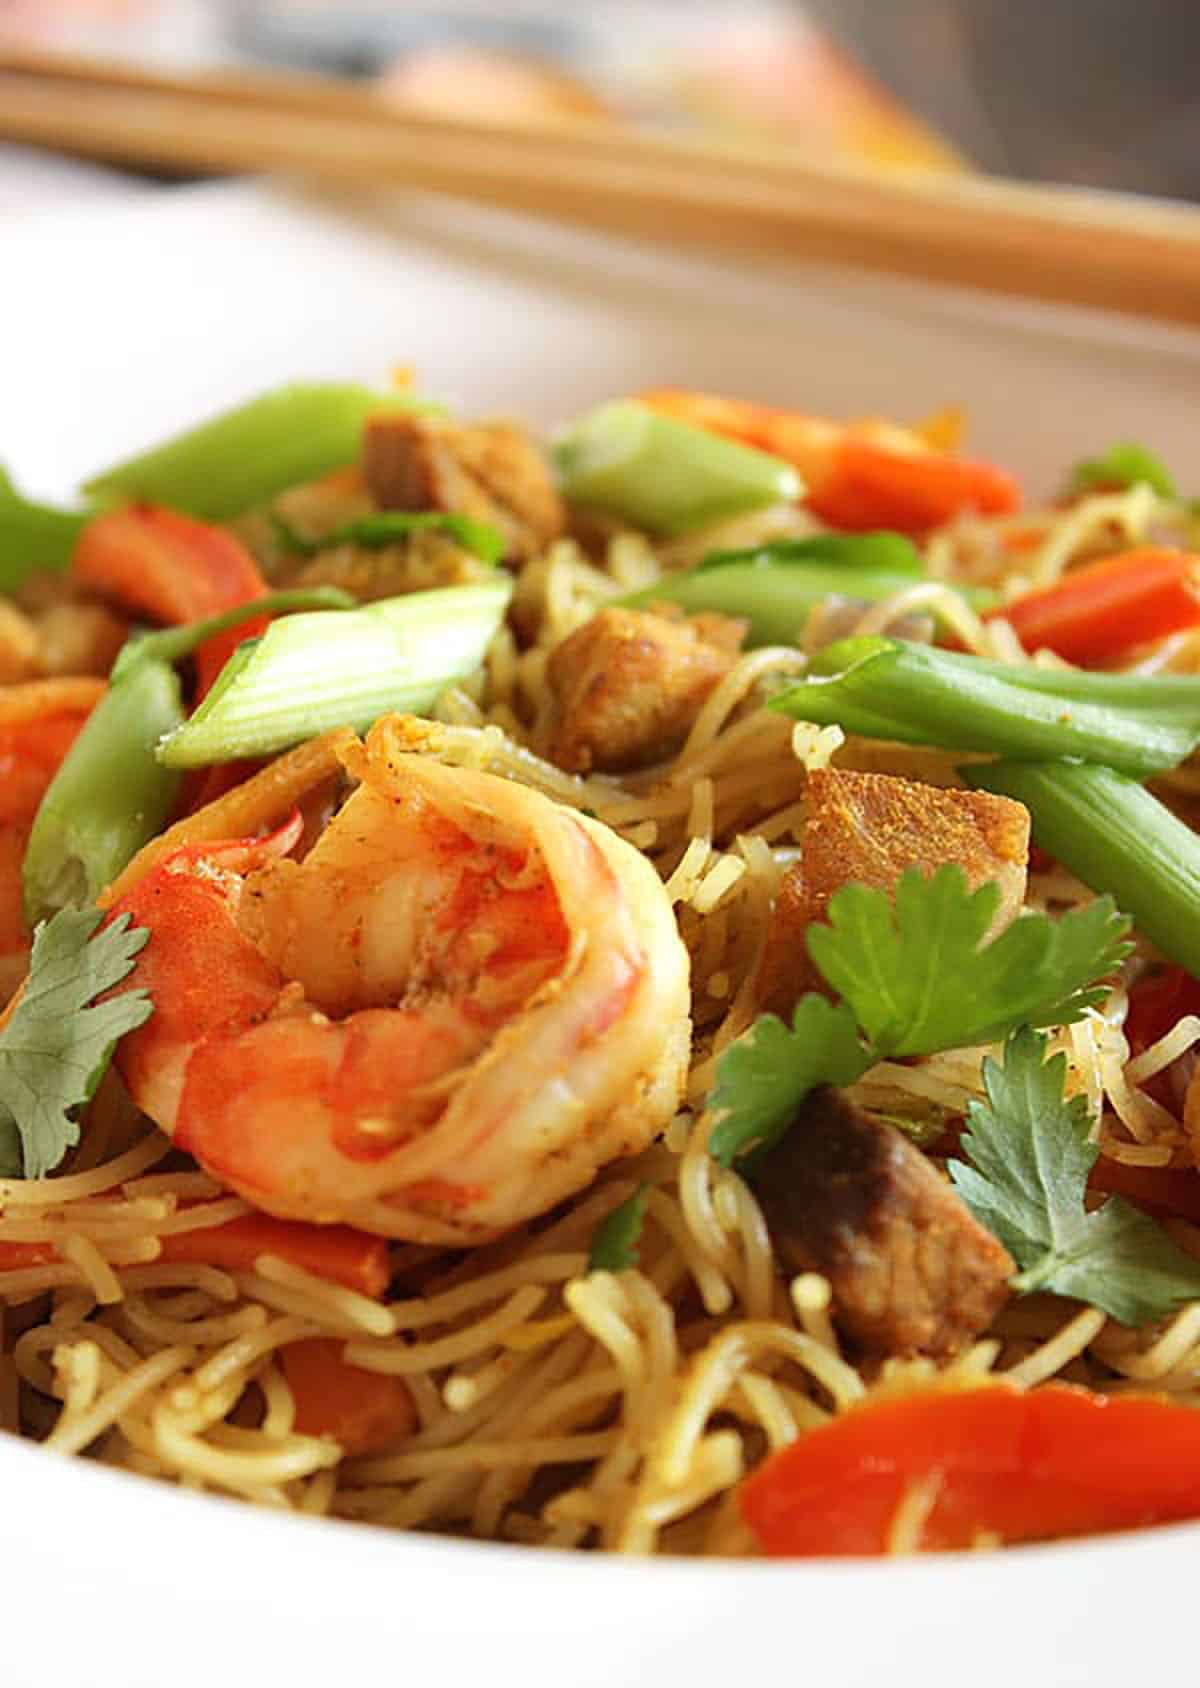 Singapore noodles with shrimp in a white bowl.